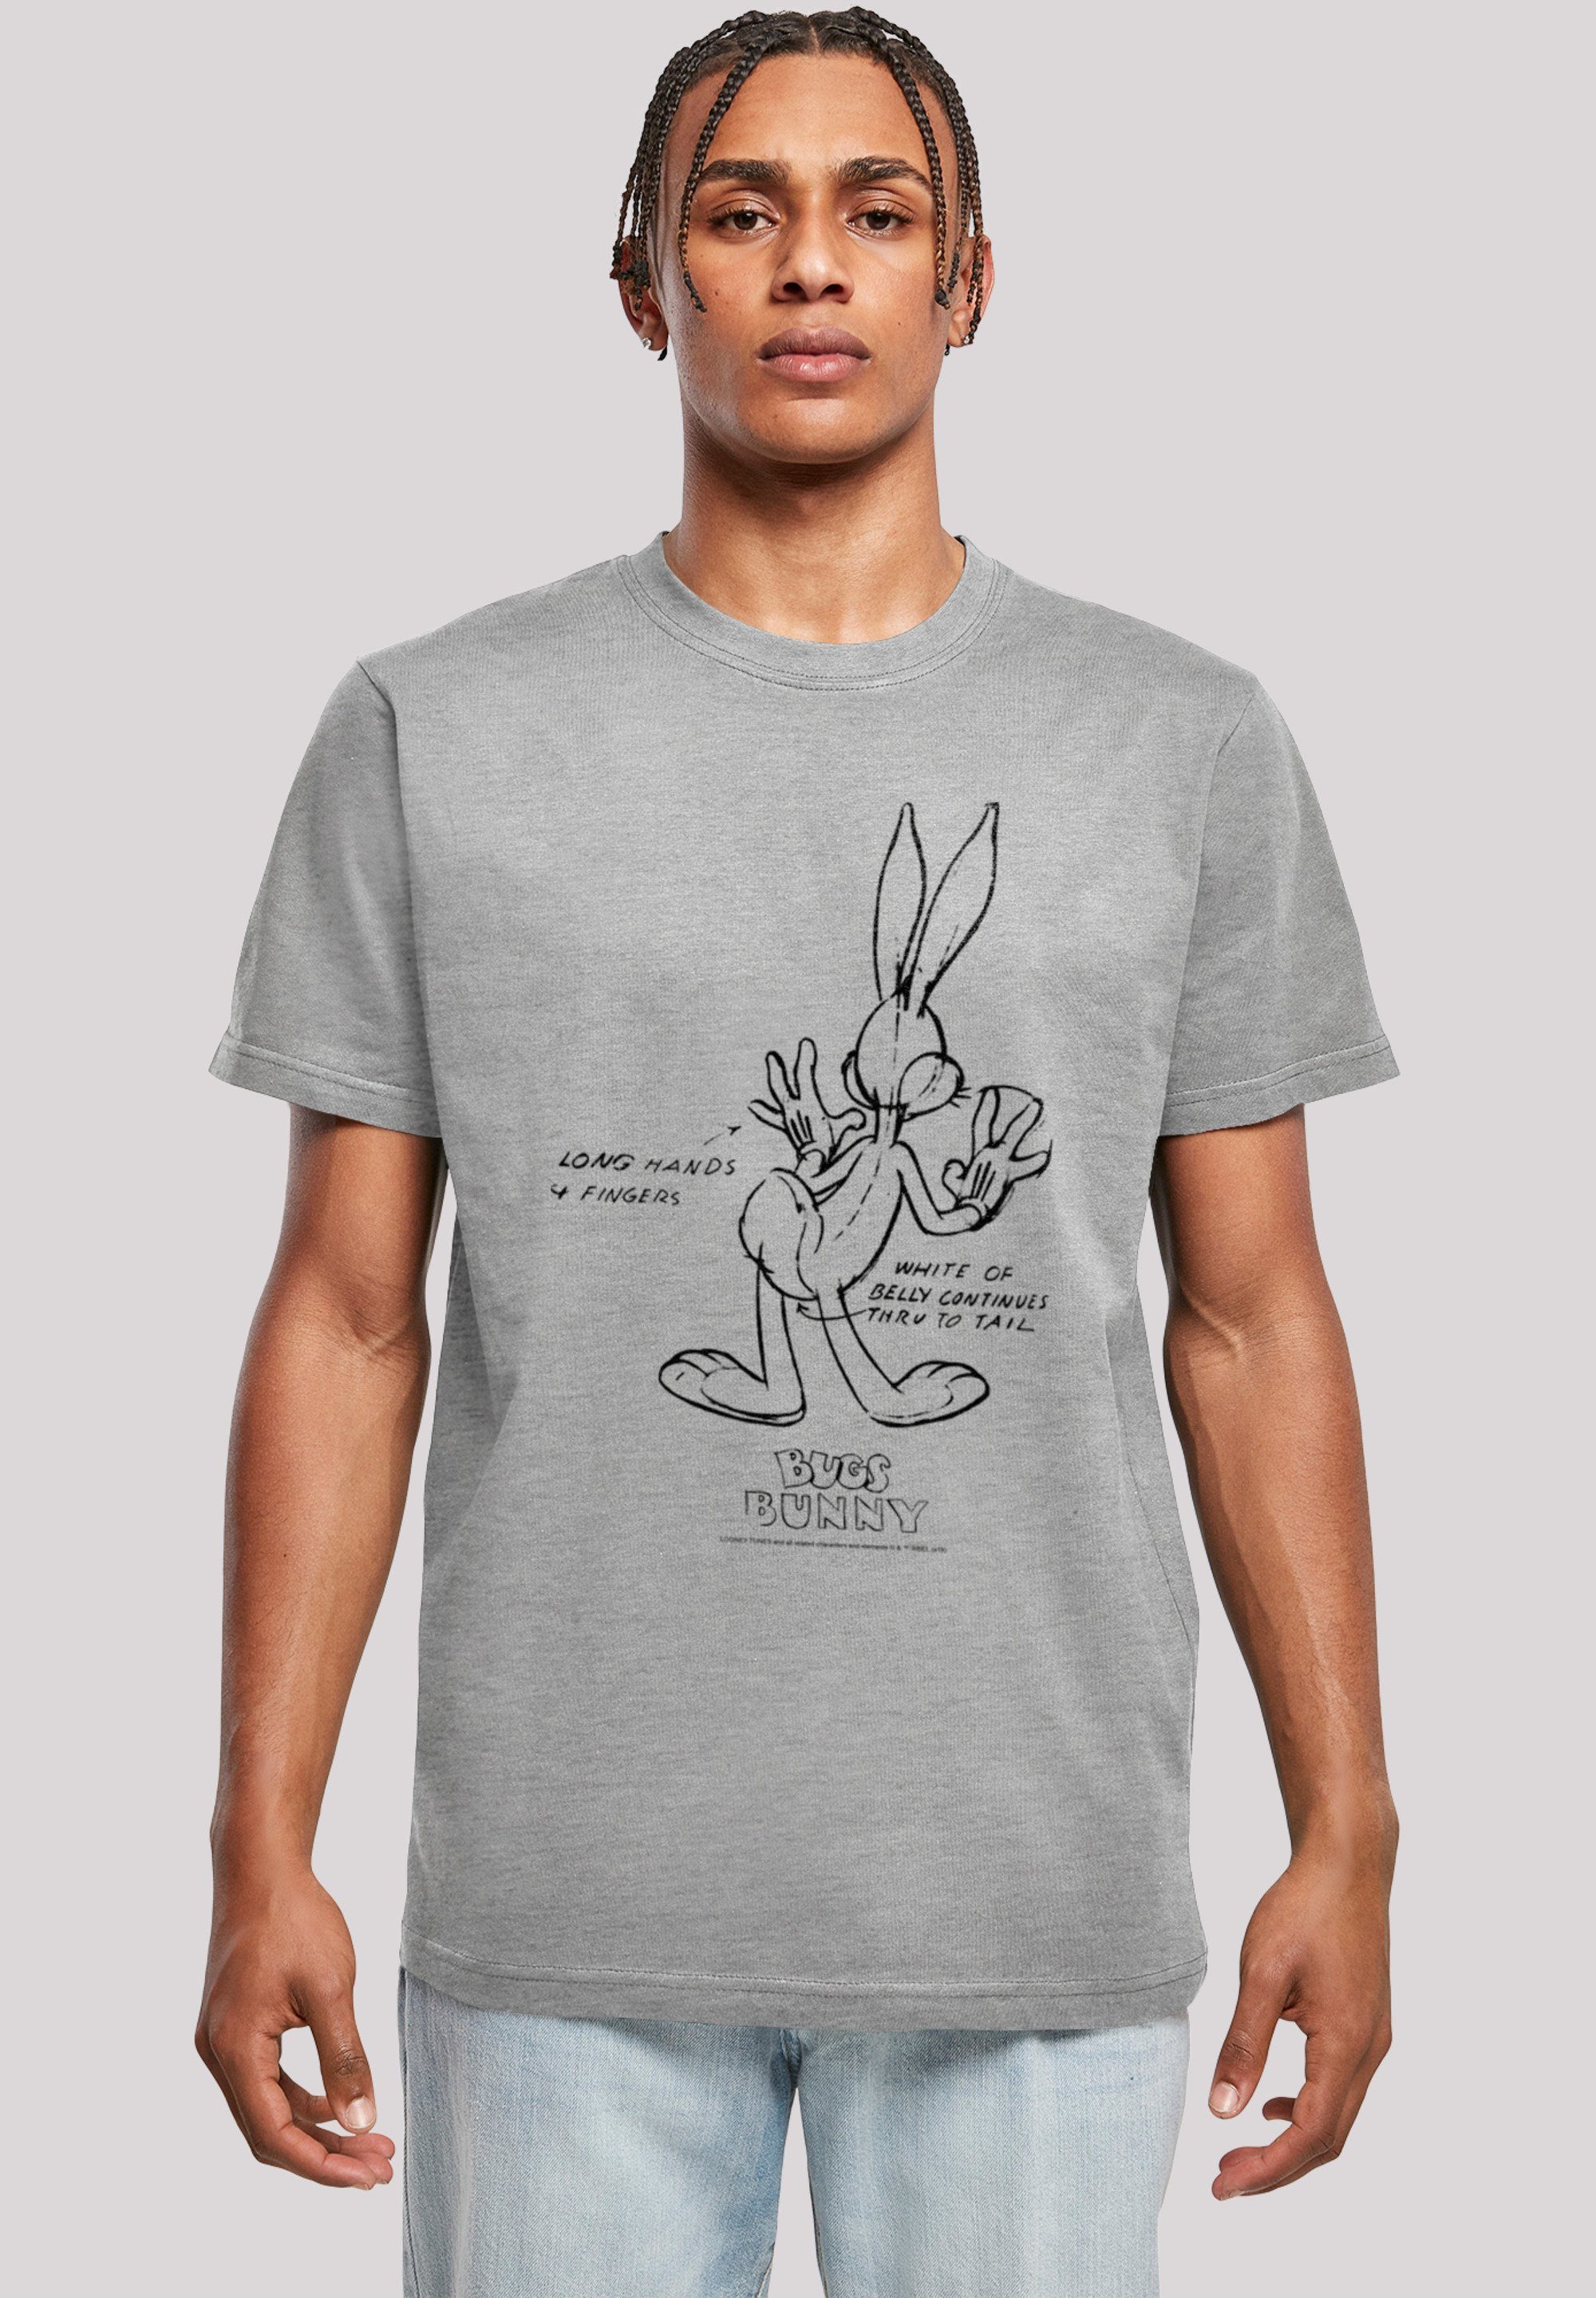 F4NT4STIC Looney T-Shirt Tunes Print grey heather Belly Bunny White Bugs